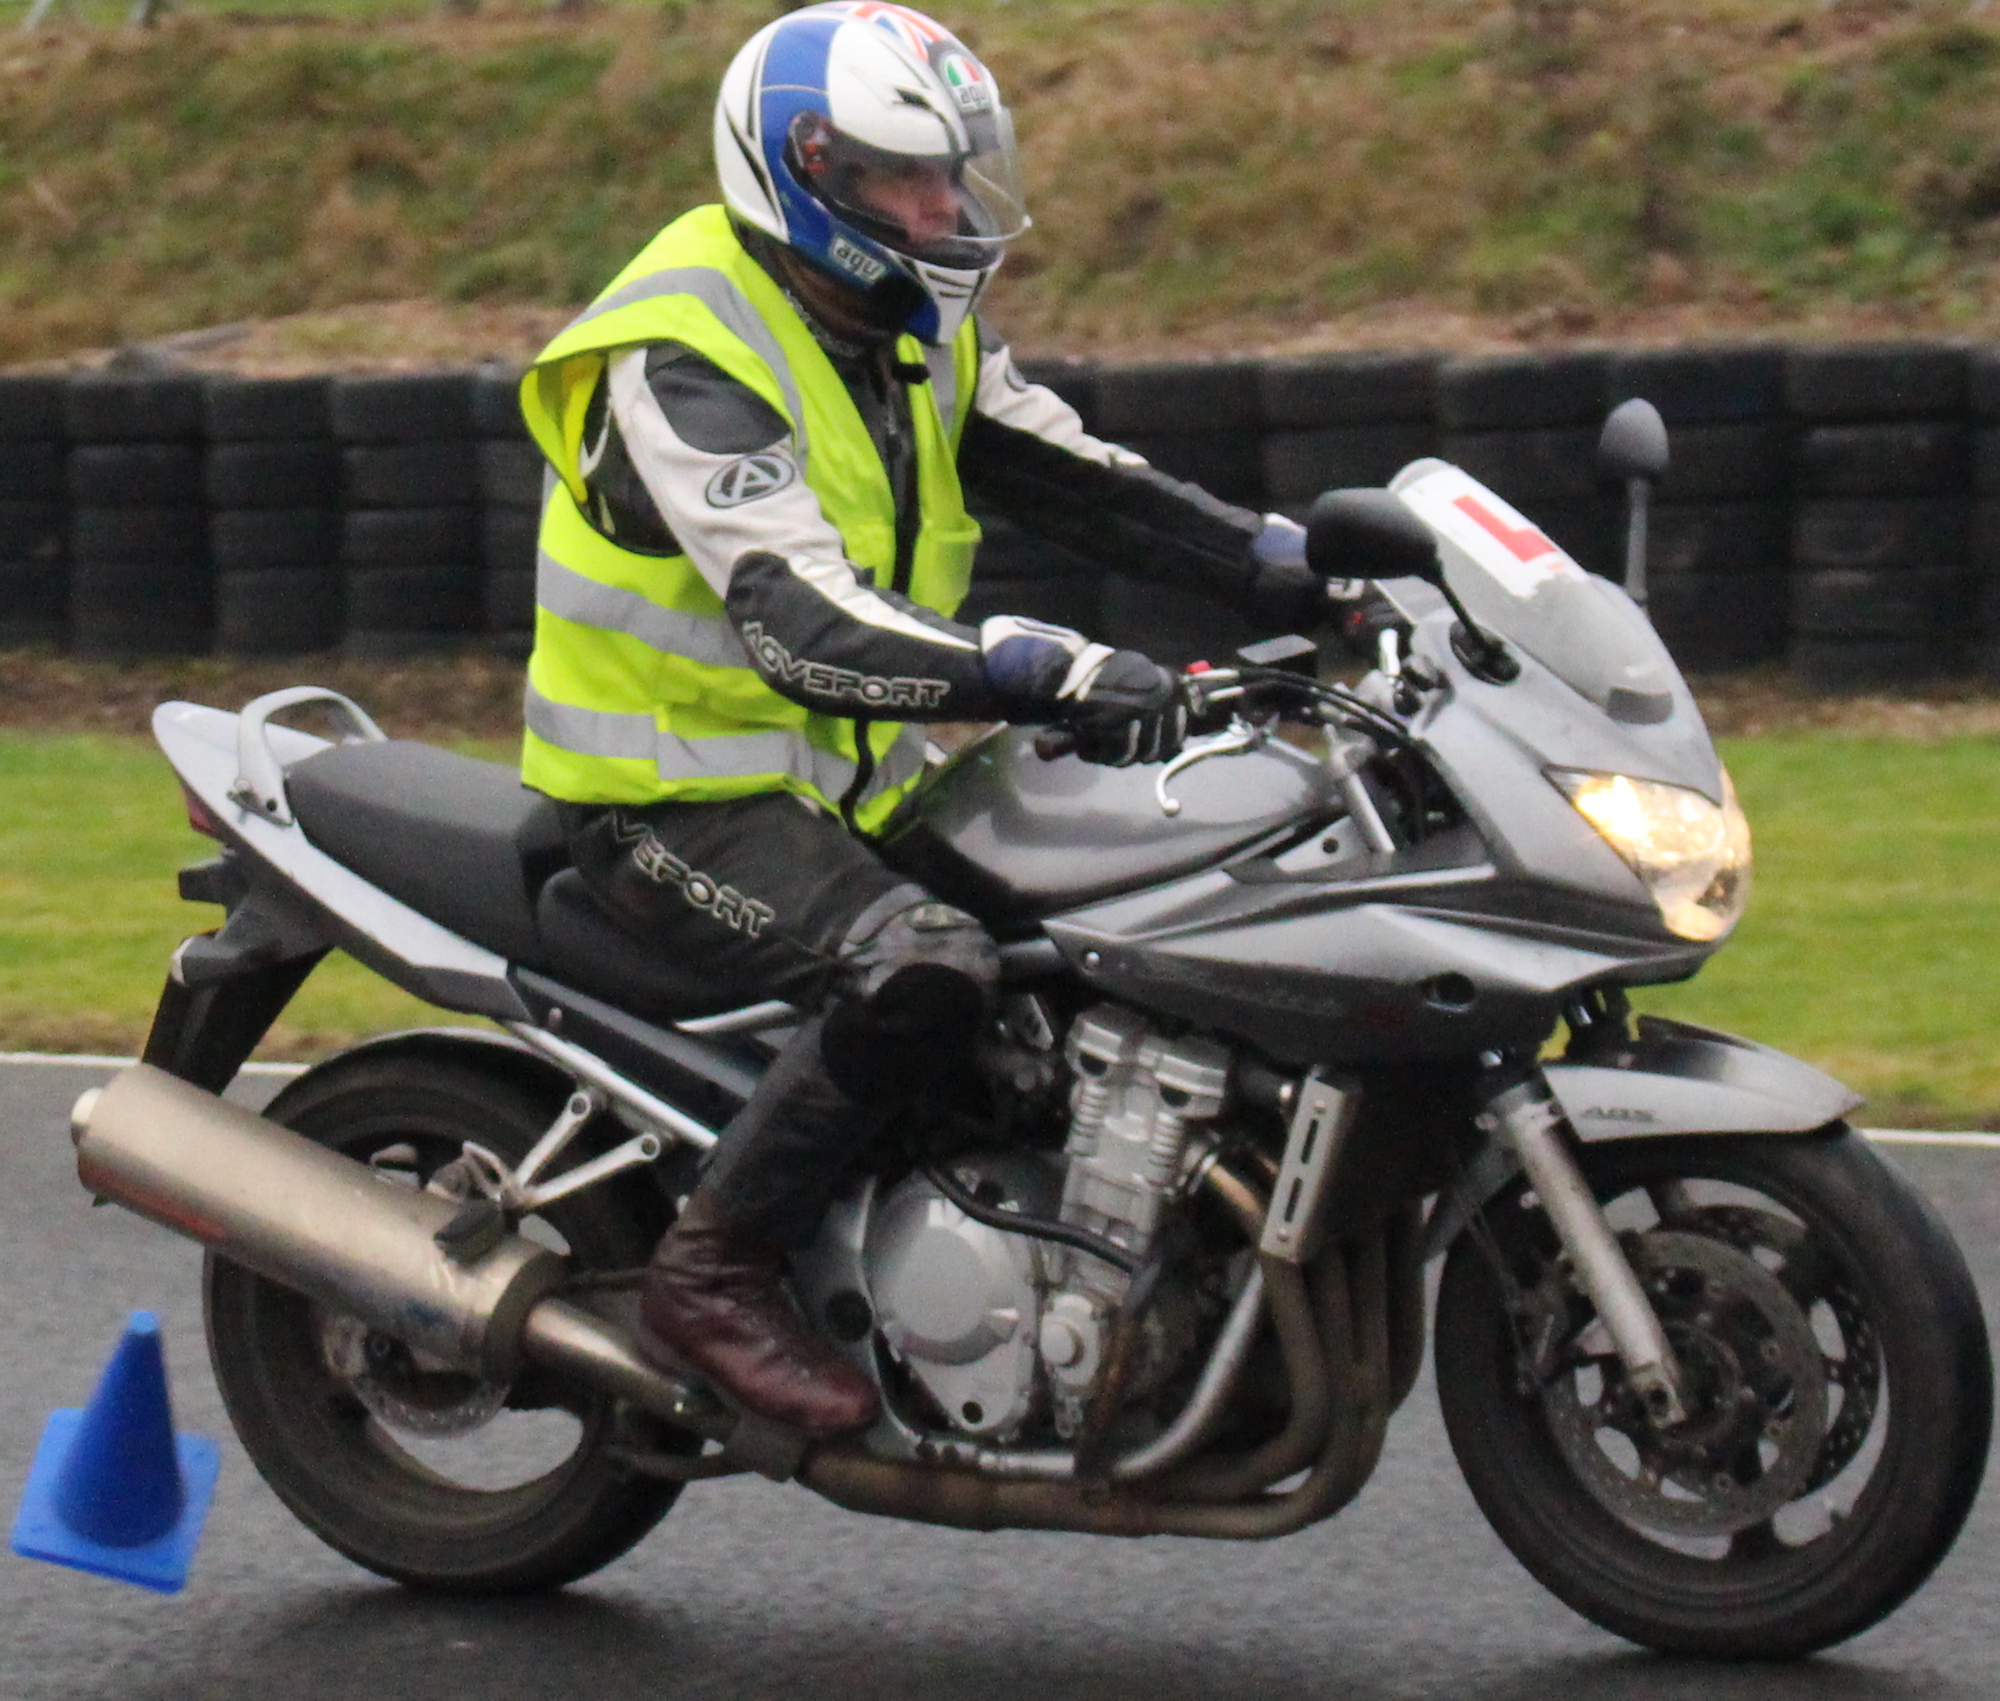 Motorcycle test Shires